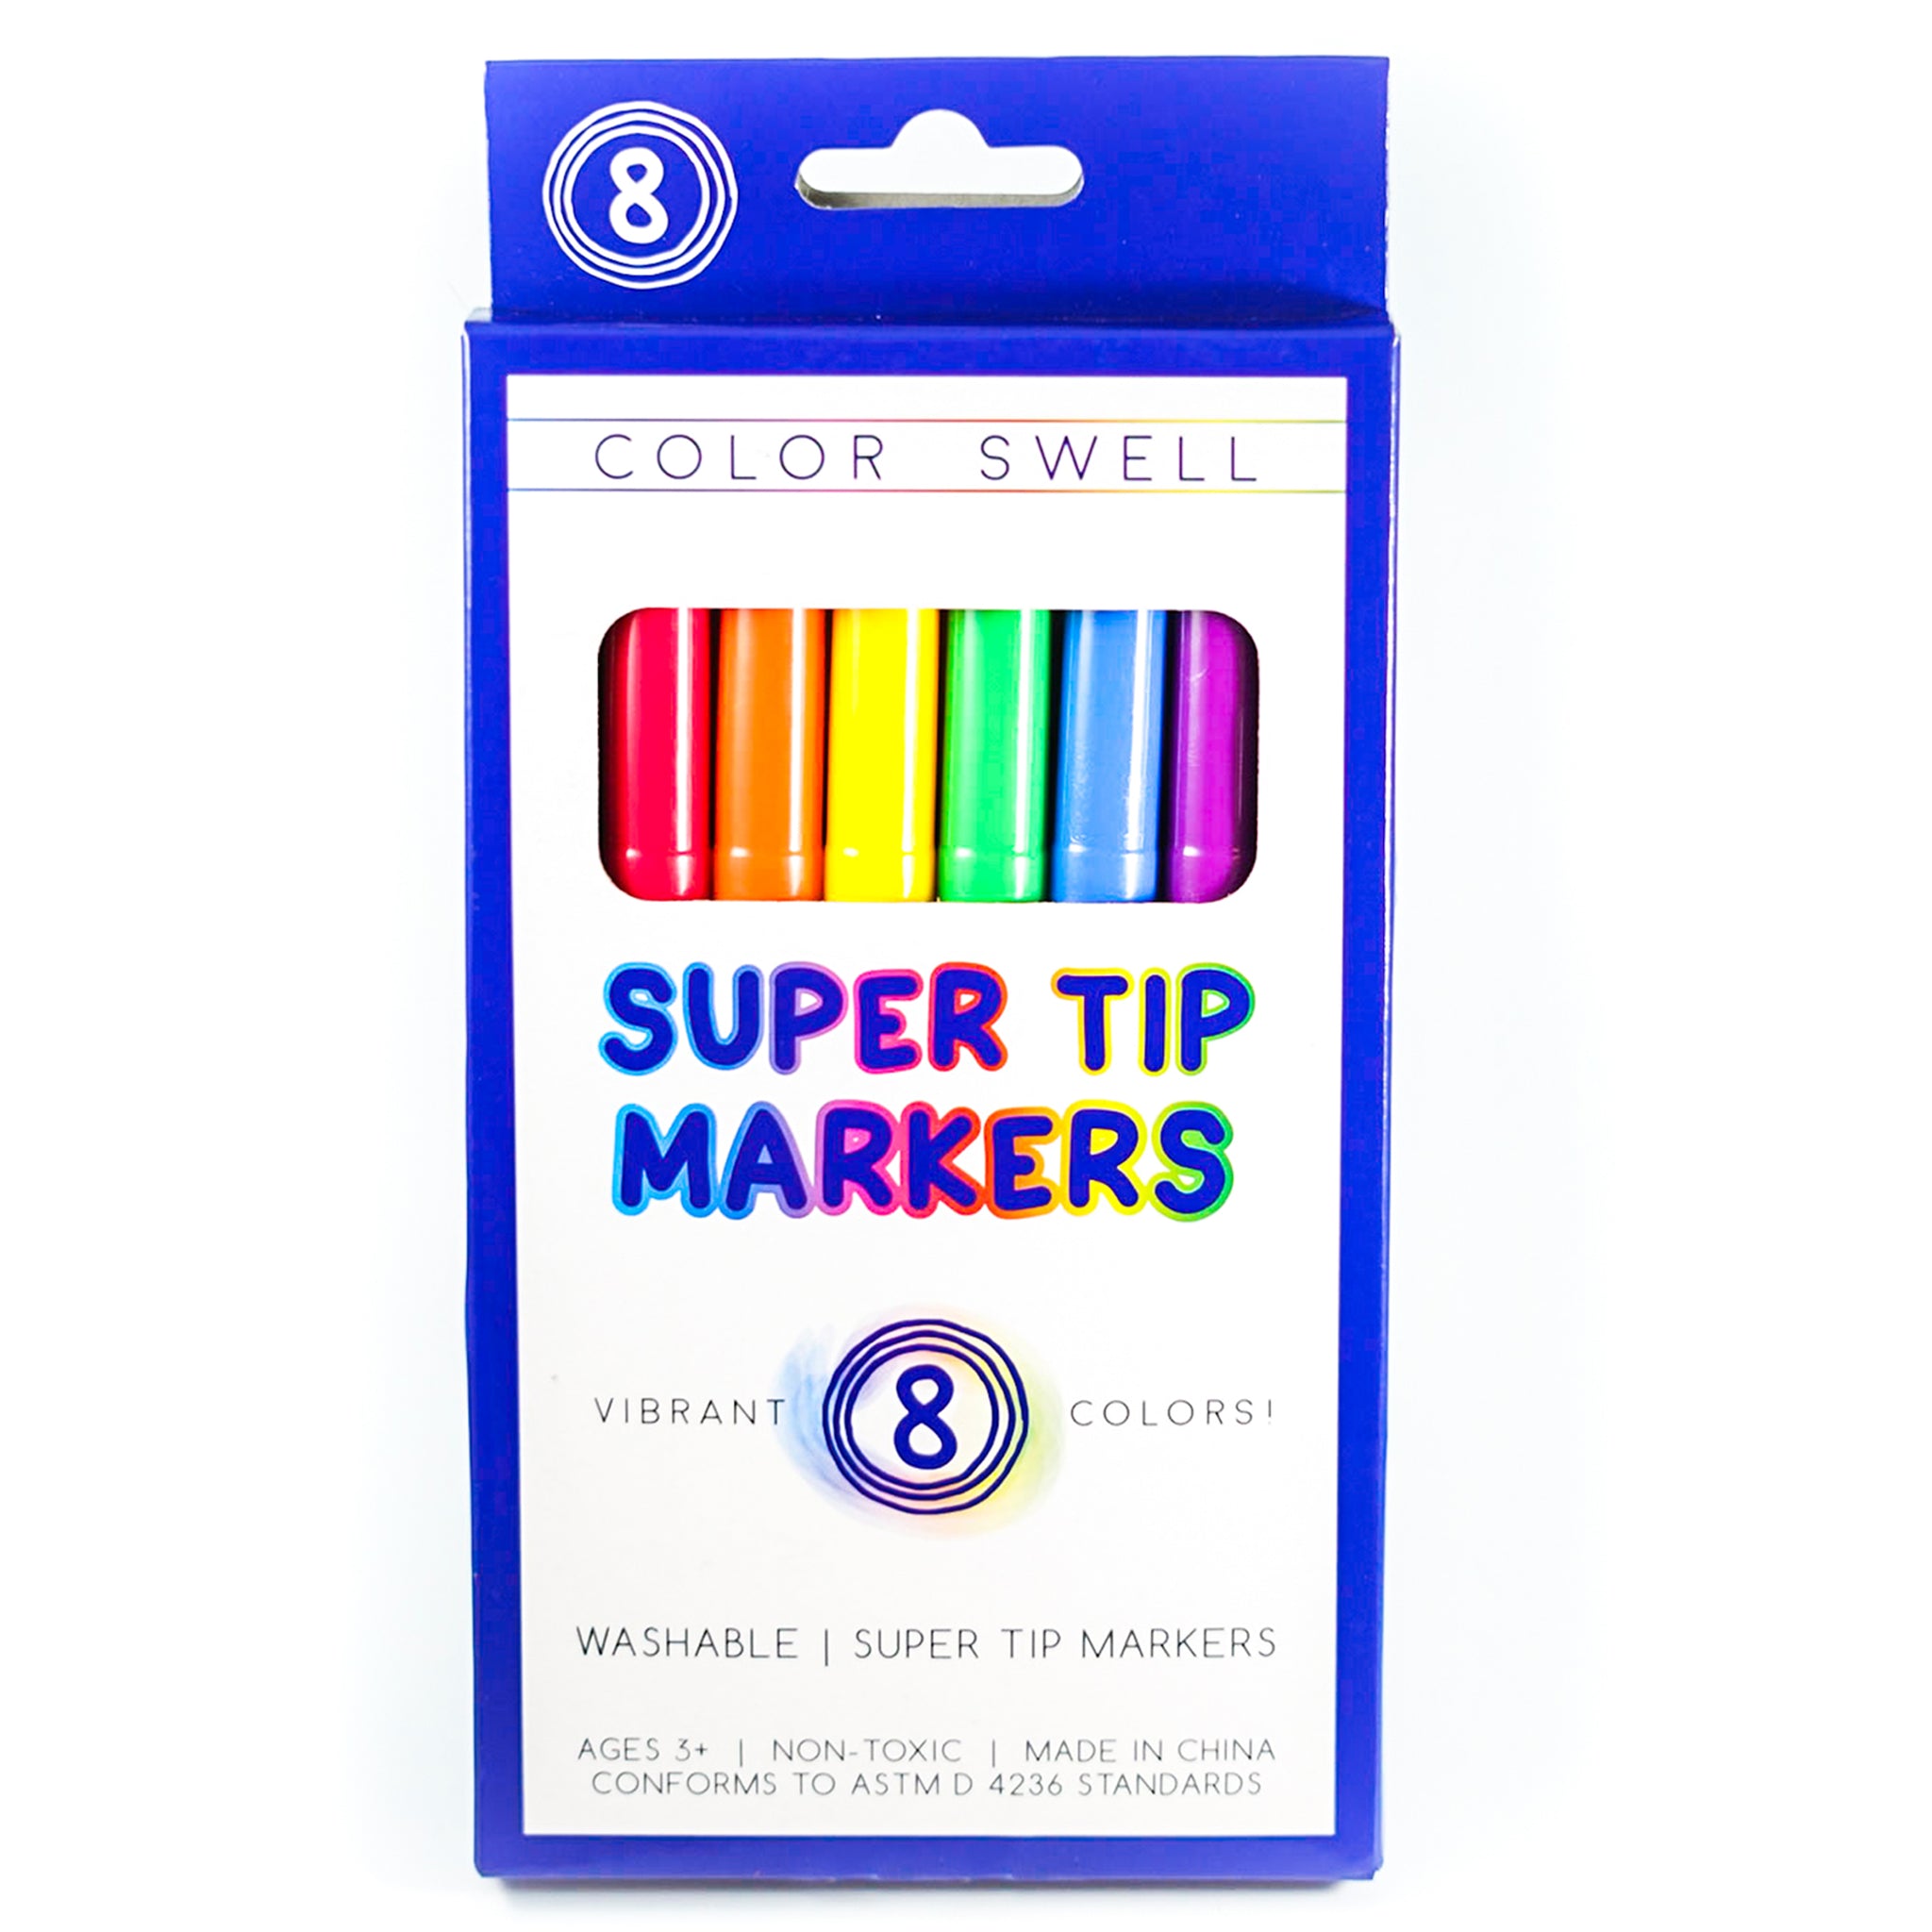 Color Swell Super Tip Washable Bulk Markers Pack 36 Boxes of 8 Vibrant  Colors Each (288 Total Markers) for All Ages, Parties, Classrooms, Home